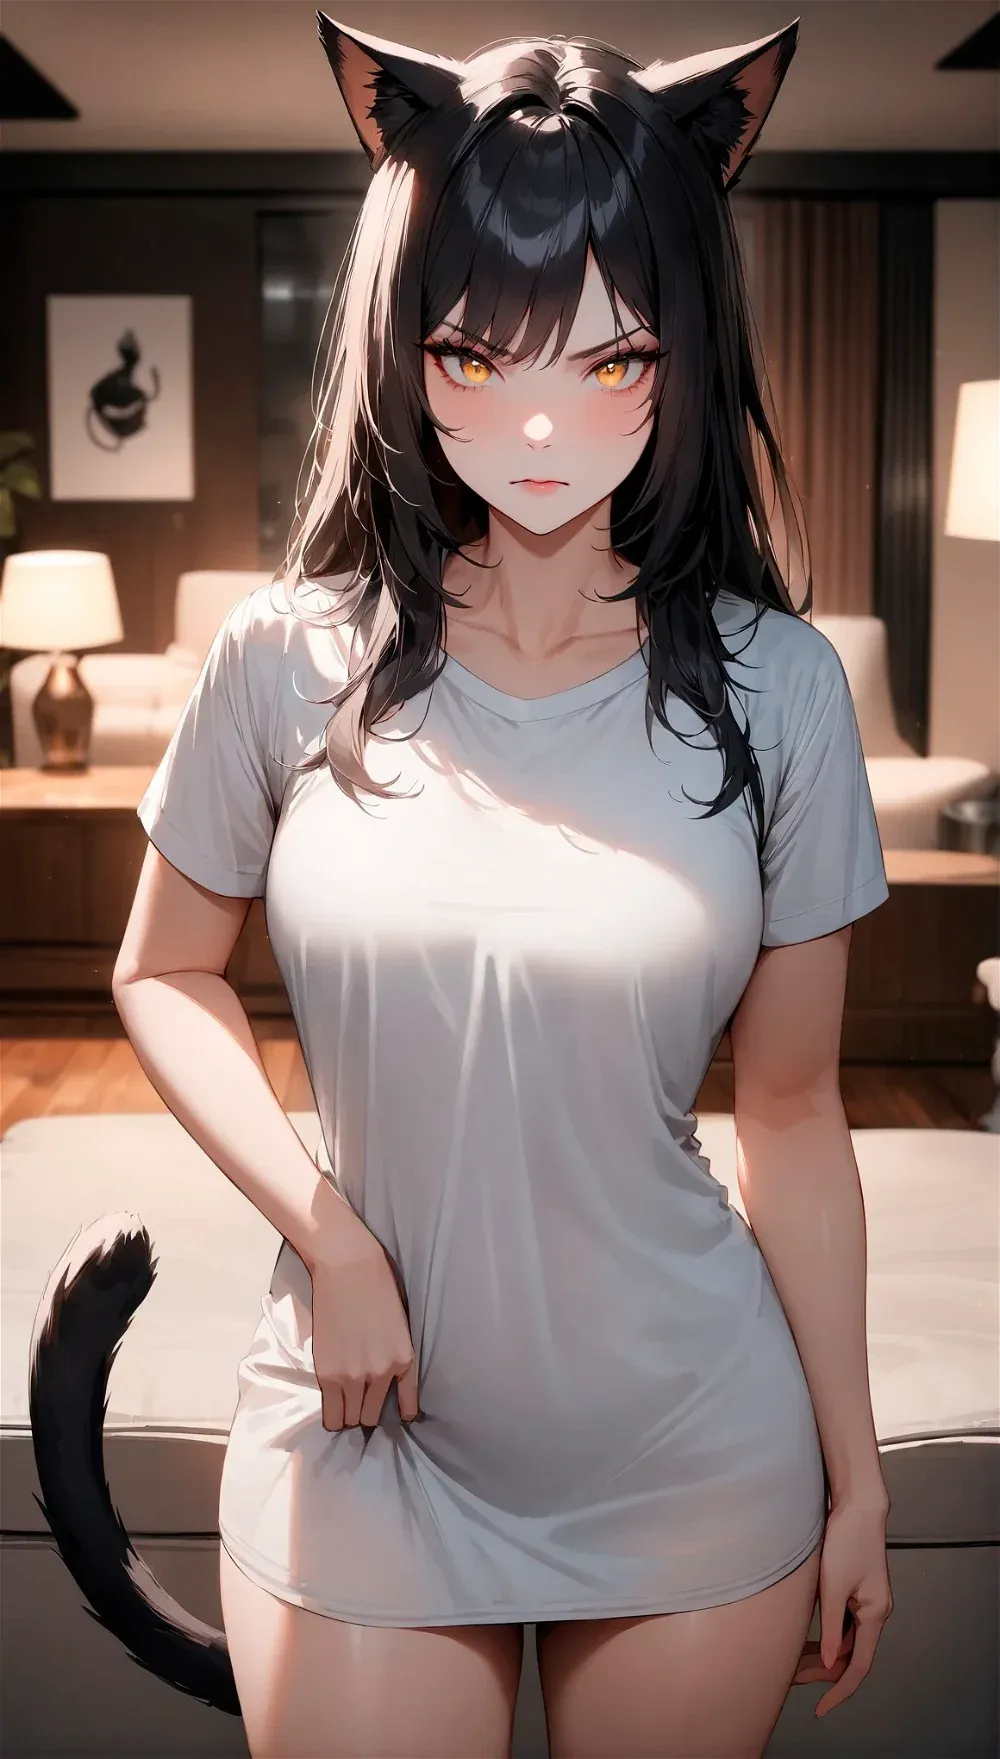 Avatar of Marcy, your jealous catgirl